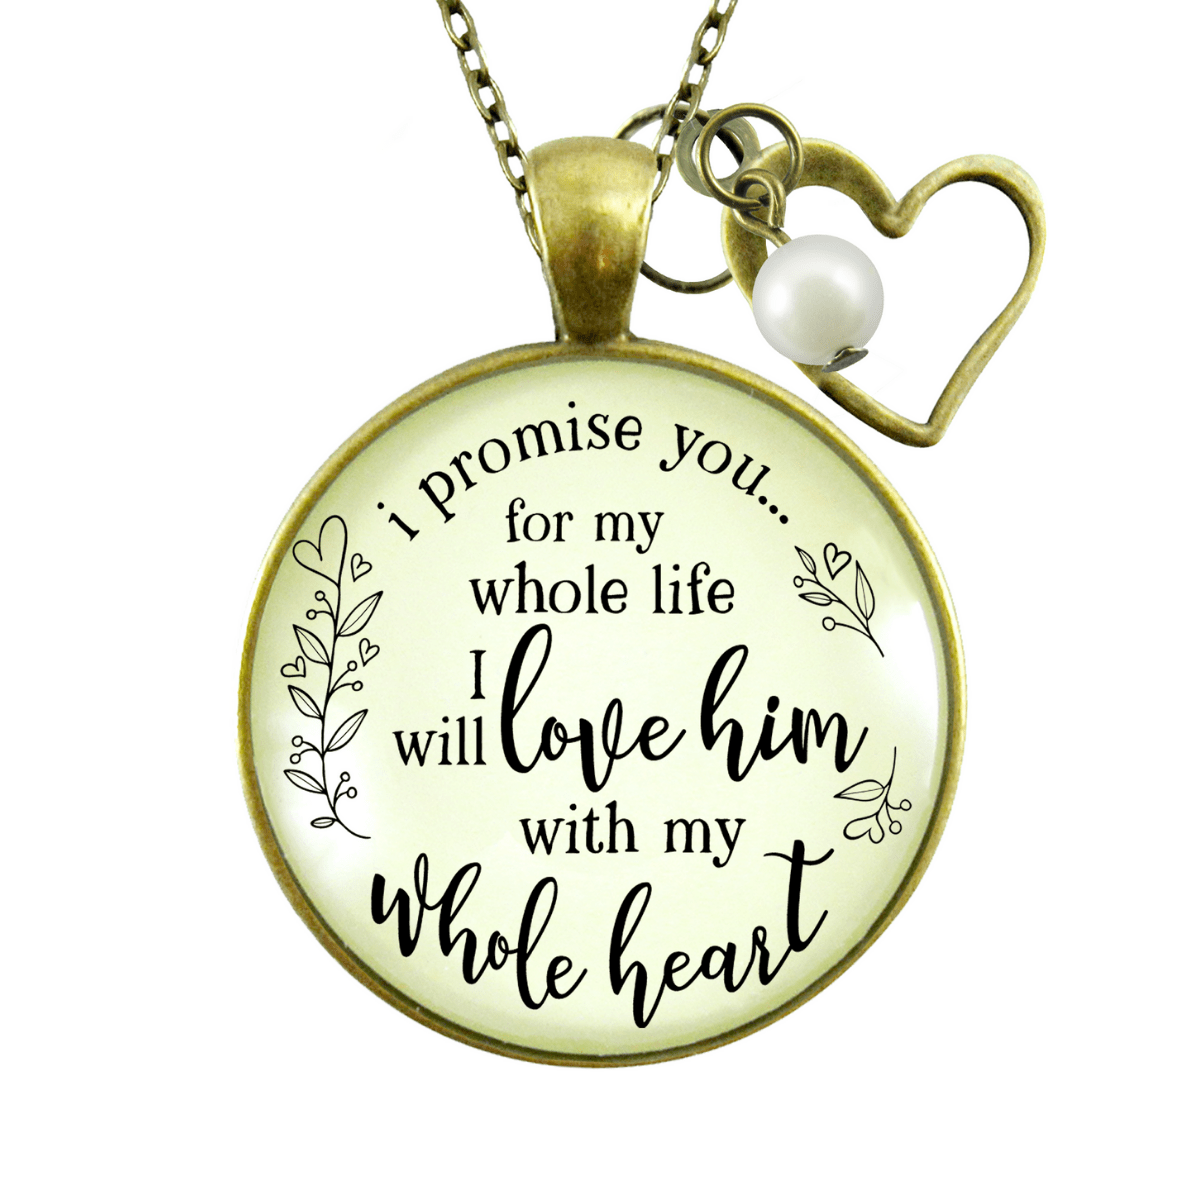 Gutsy Goodness Mother-In-Law Necklace I Promise To Love Him Gift Bride Wedding Jewelry - Gutsy Goodness;Mother-In-Law Necklace I Promise To Love Him Gift Bride Wedding Jewelry - Gutsy Goodness Handmade Jewelry Gifts